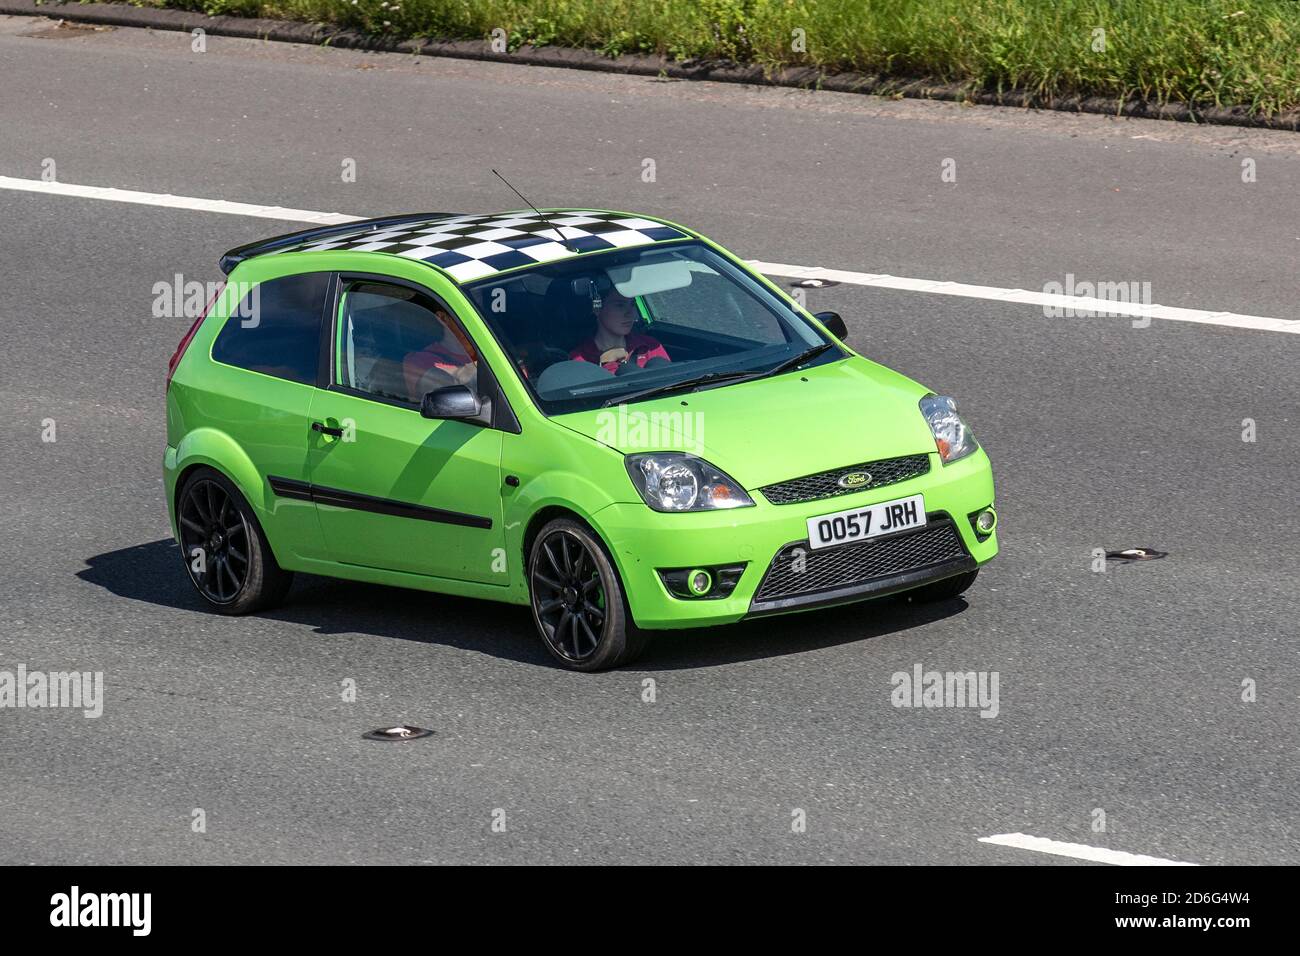 https://c8.alamy.com/comp/2D6G4W4/2008-green-limited-edition-ford-fiesta-mk6-zetec-celebration-1-of-400-in-green-vehicular-traffic-moving-vehicles-cars-vehicle-driving-on-uk-roads-motors-motoring-on-the-m6-motorway-highway-uk-road-network-2D6G4W4.jpg